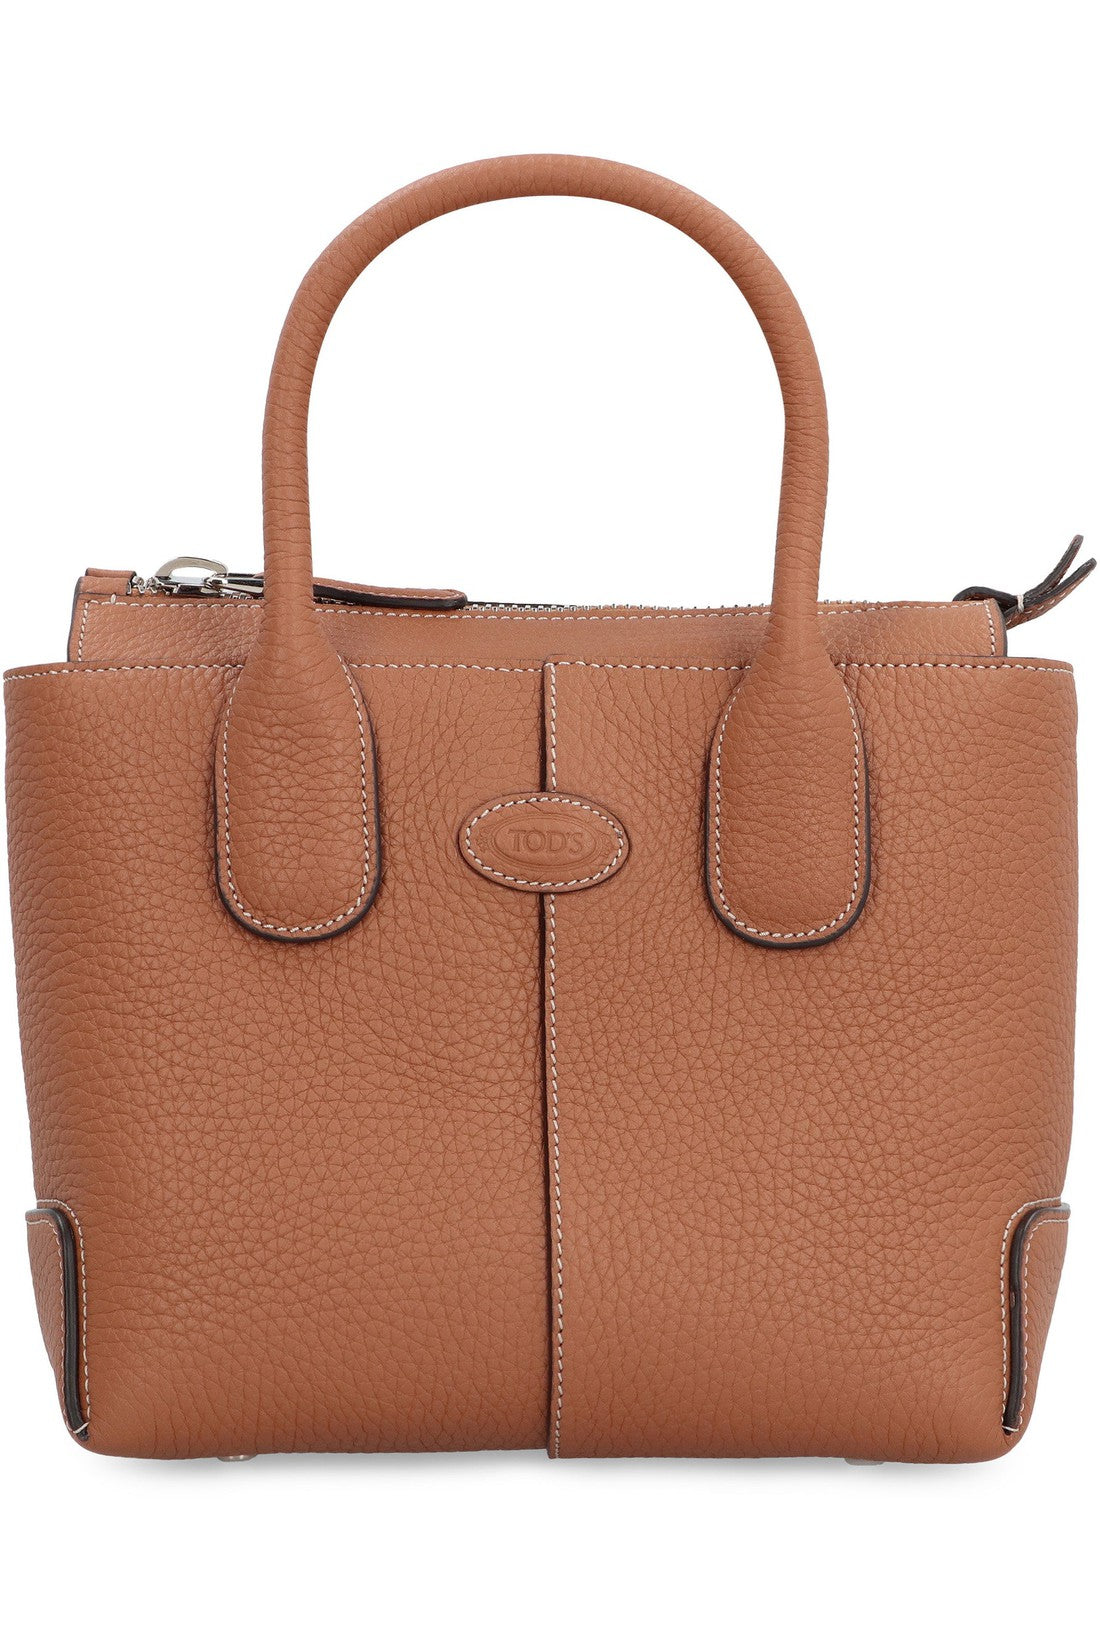 Tod's-OUTLET-SALE-Tod's Di smooth leather tote bag-ARCHIVIST